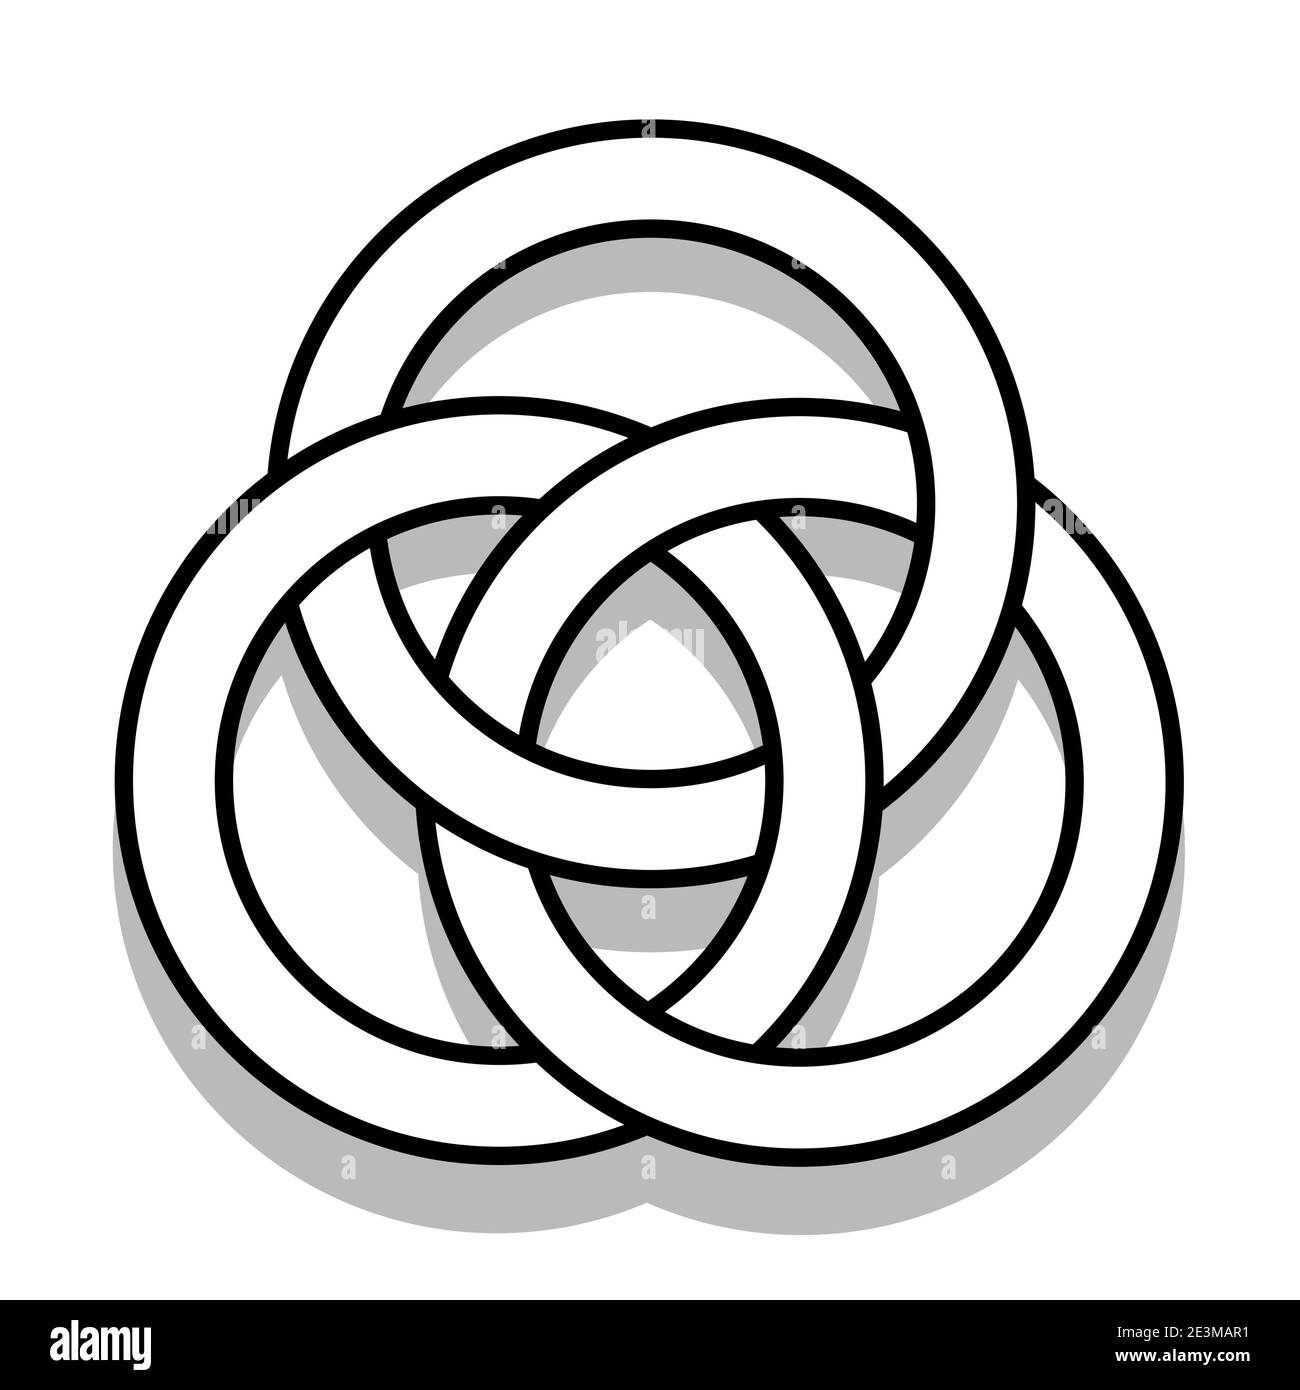 Illustration of impossible linked contour circles, also known as Borromean rings Stock Vector